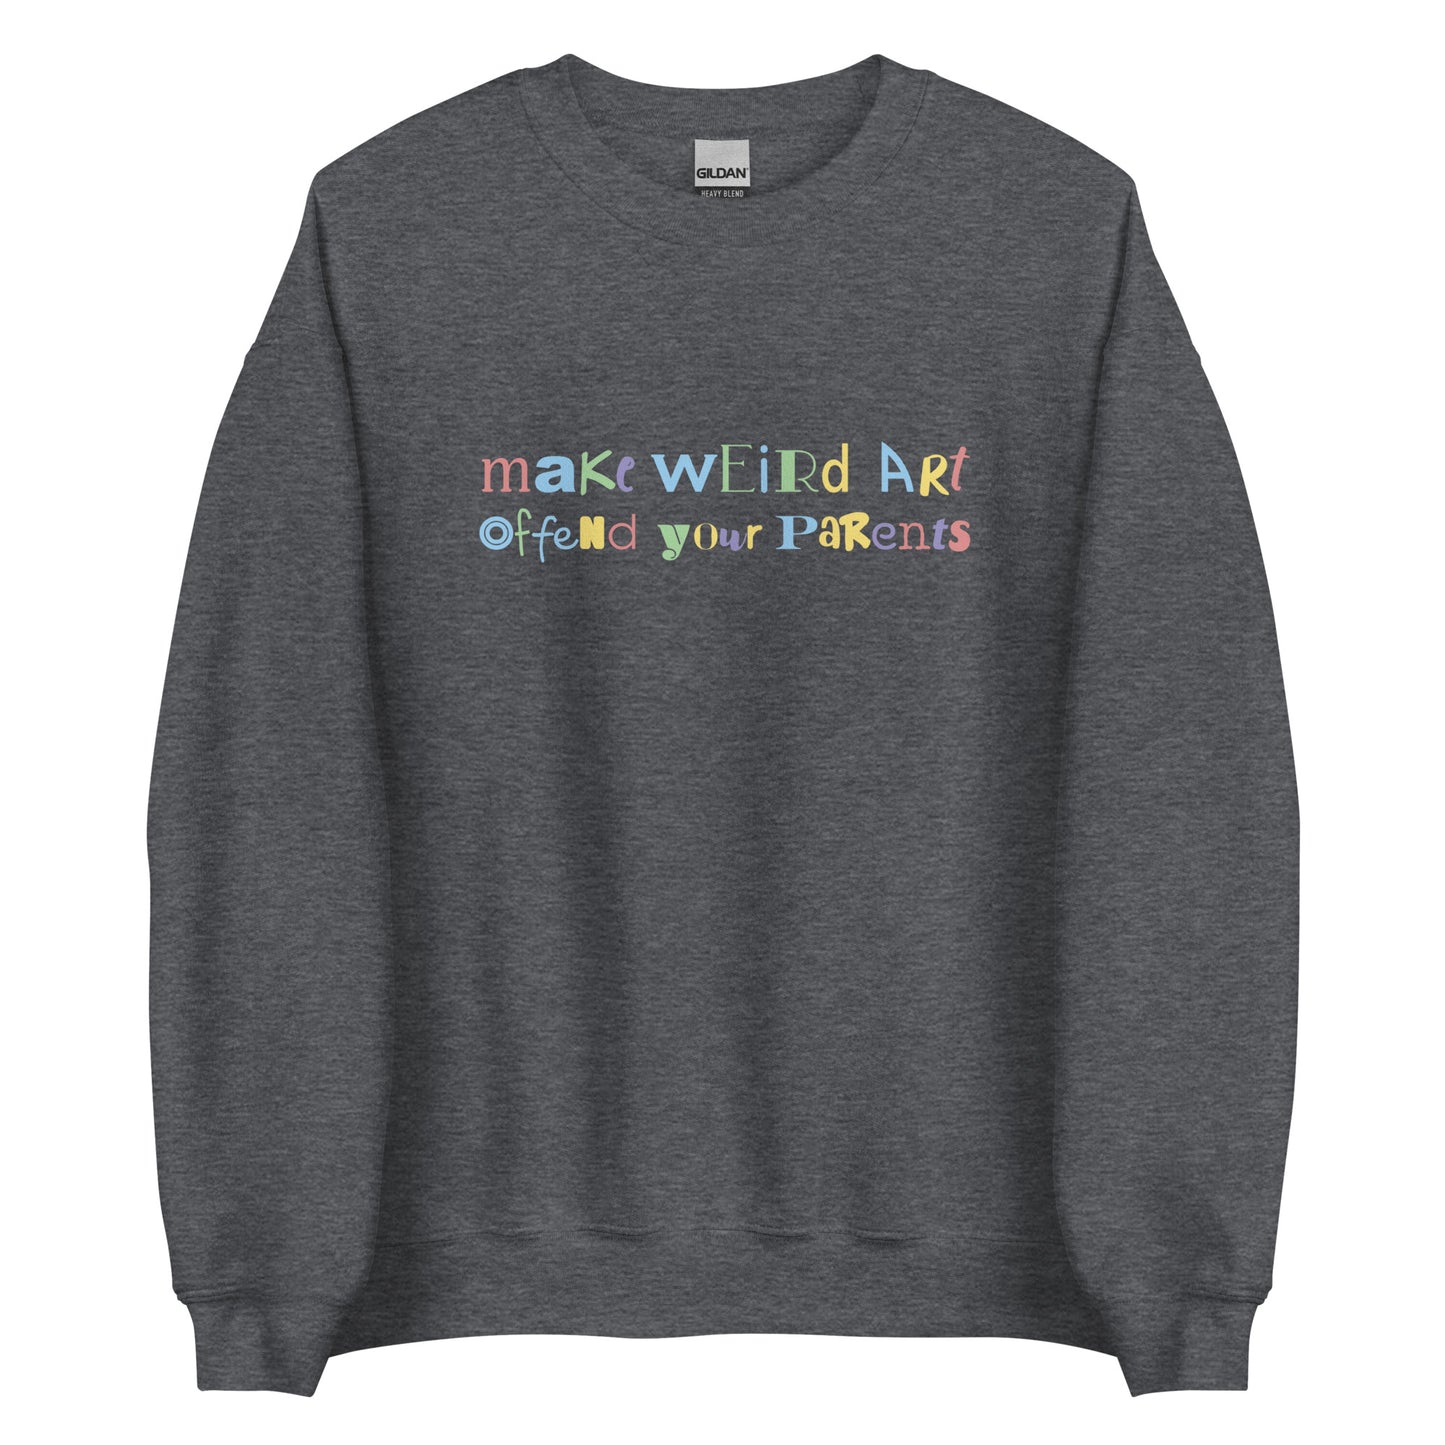 A dark grey crewneck sweatshirt featuring text that reads "make weird art, offend your parents" in varying fonts and colors